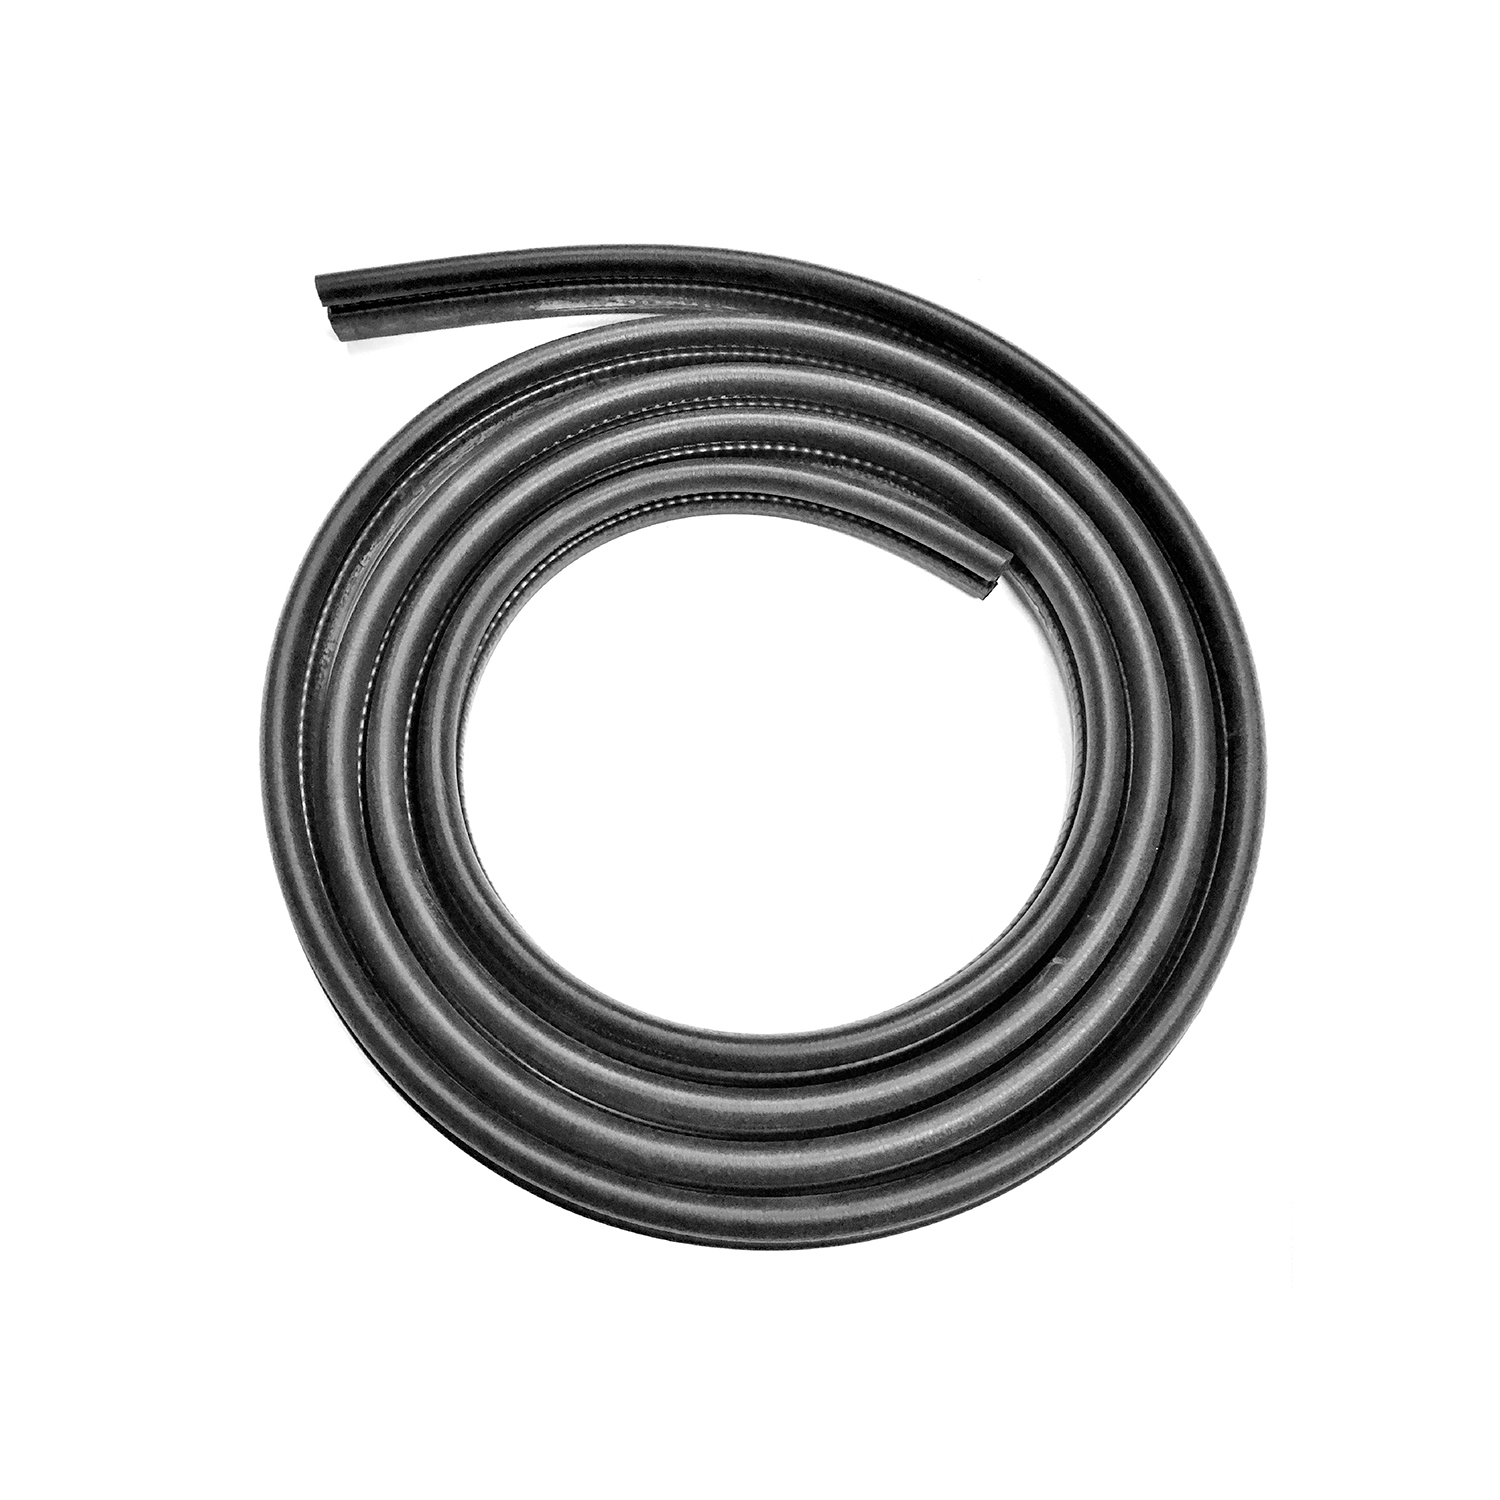 2006 Ford E-450 Super Duty Door seal, '04-'14 Ford E-Series full size van models, fits front left or right-LM 110-VH